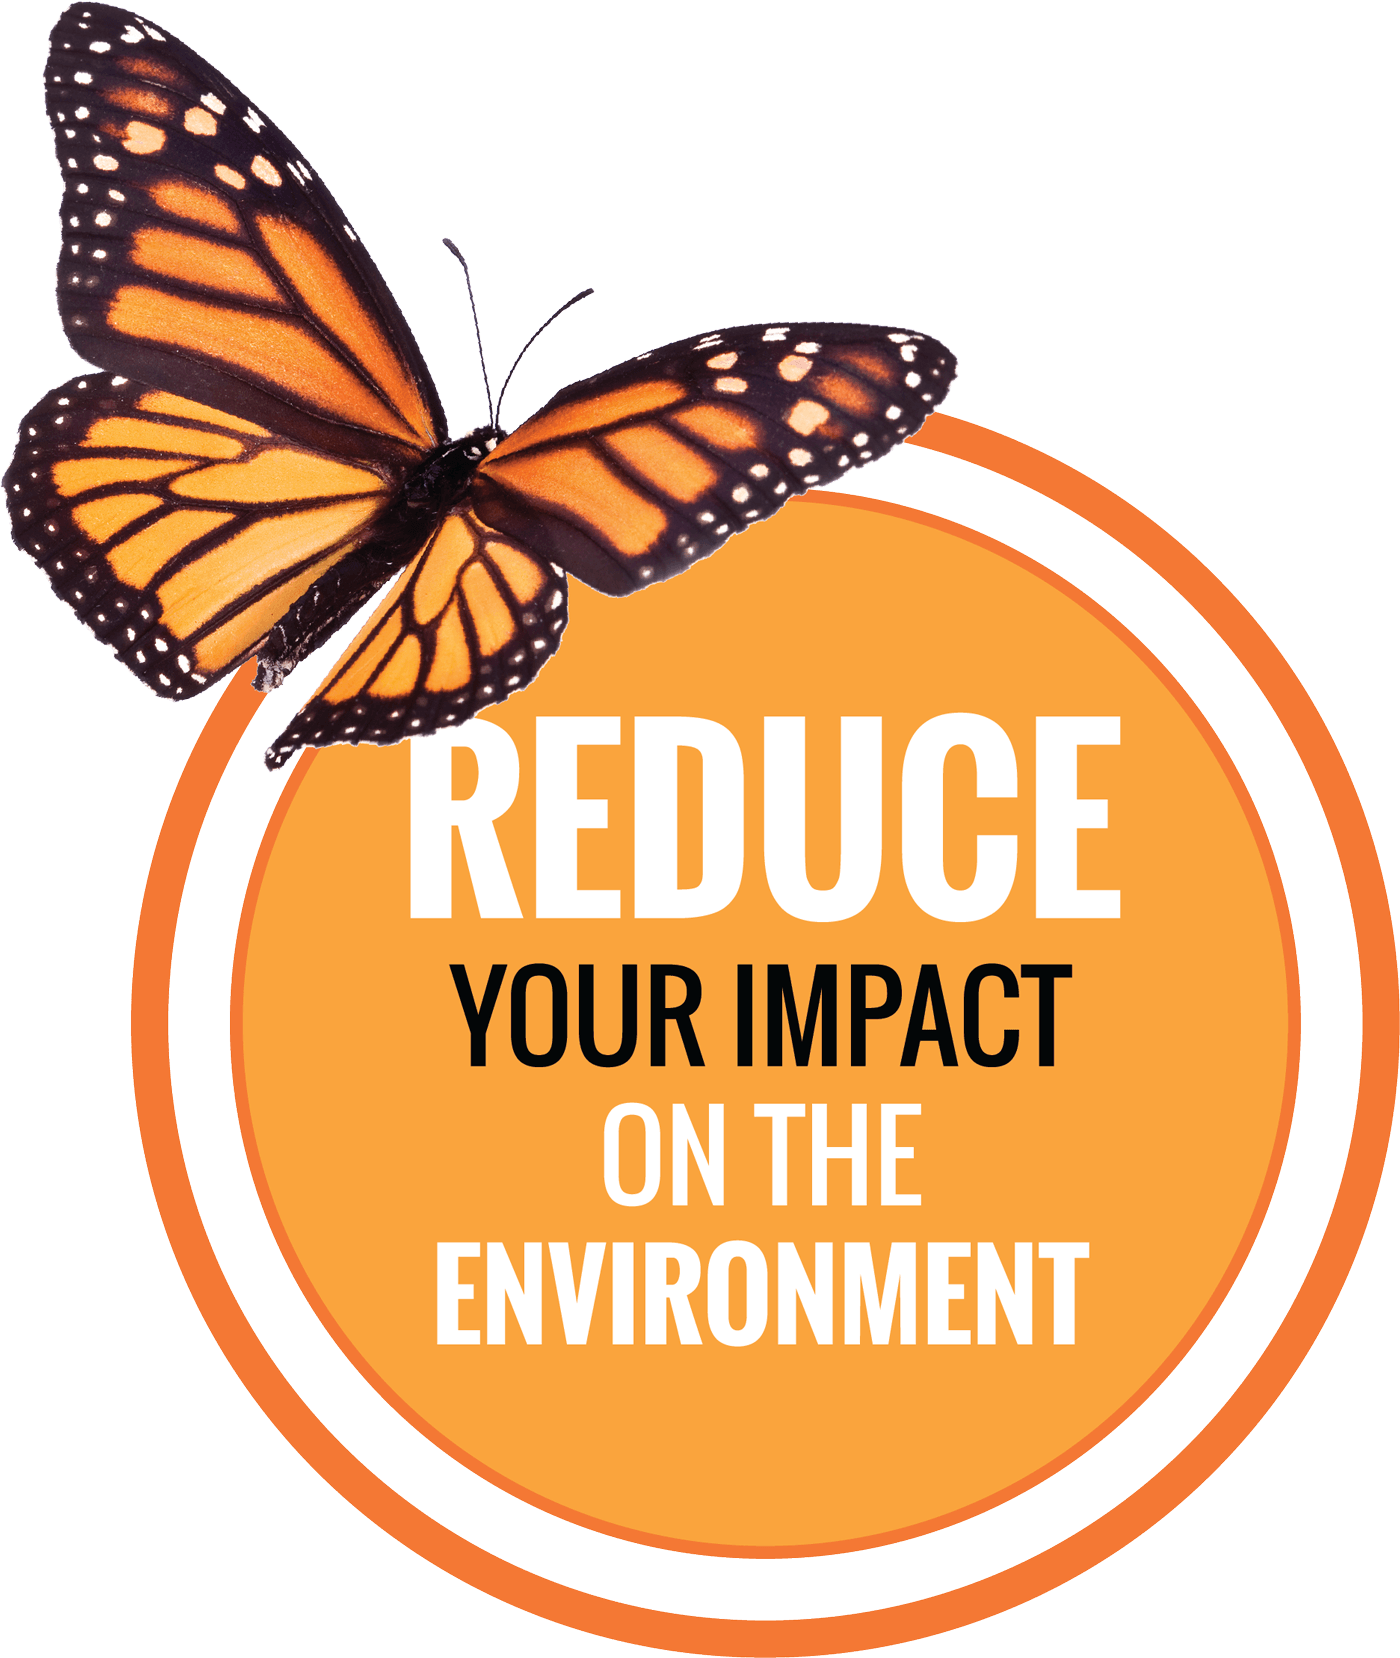 Reduce your impact